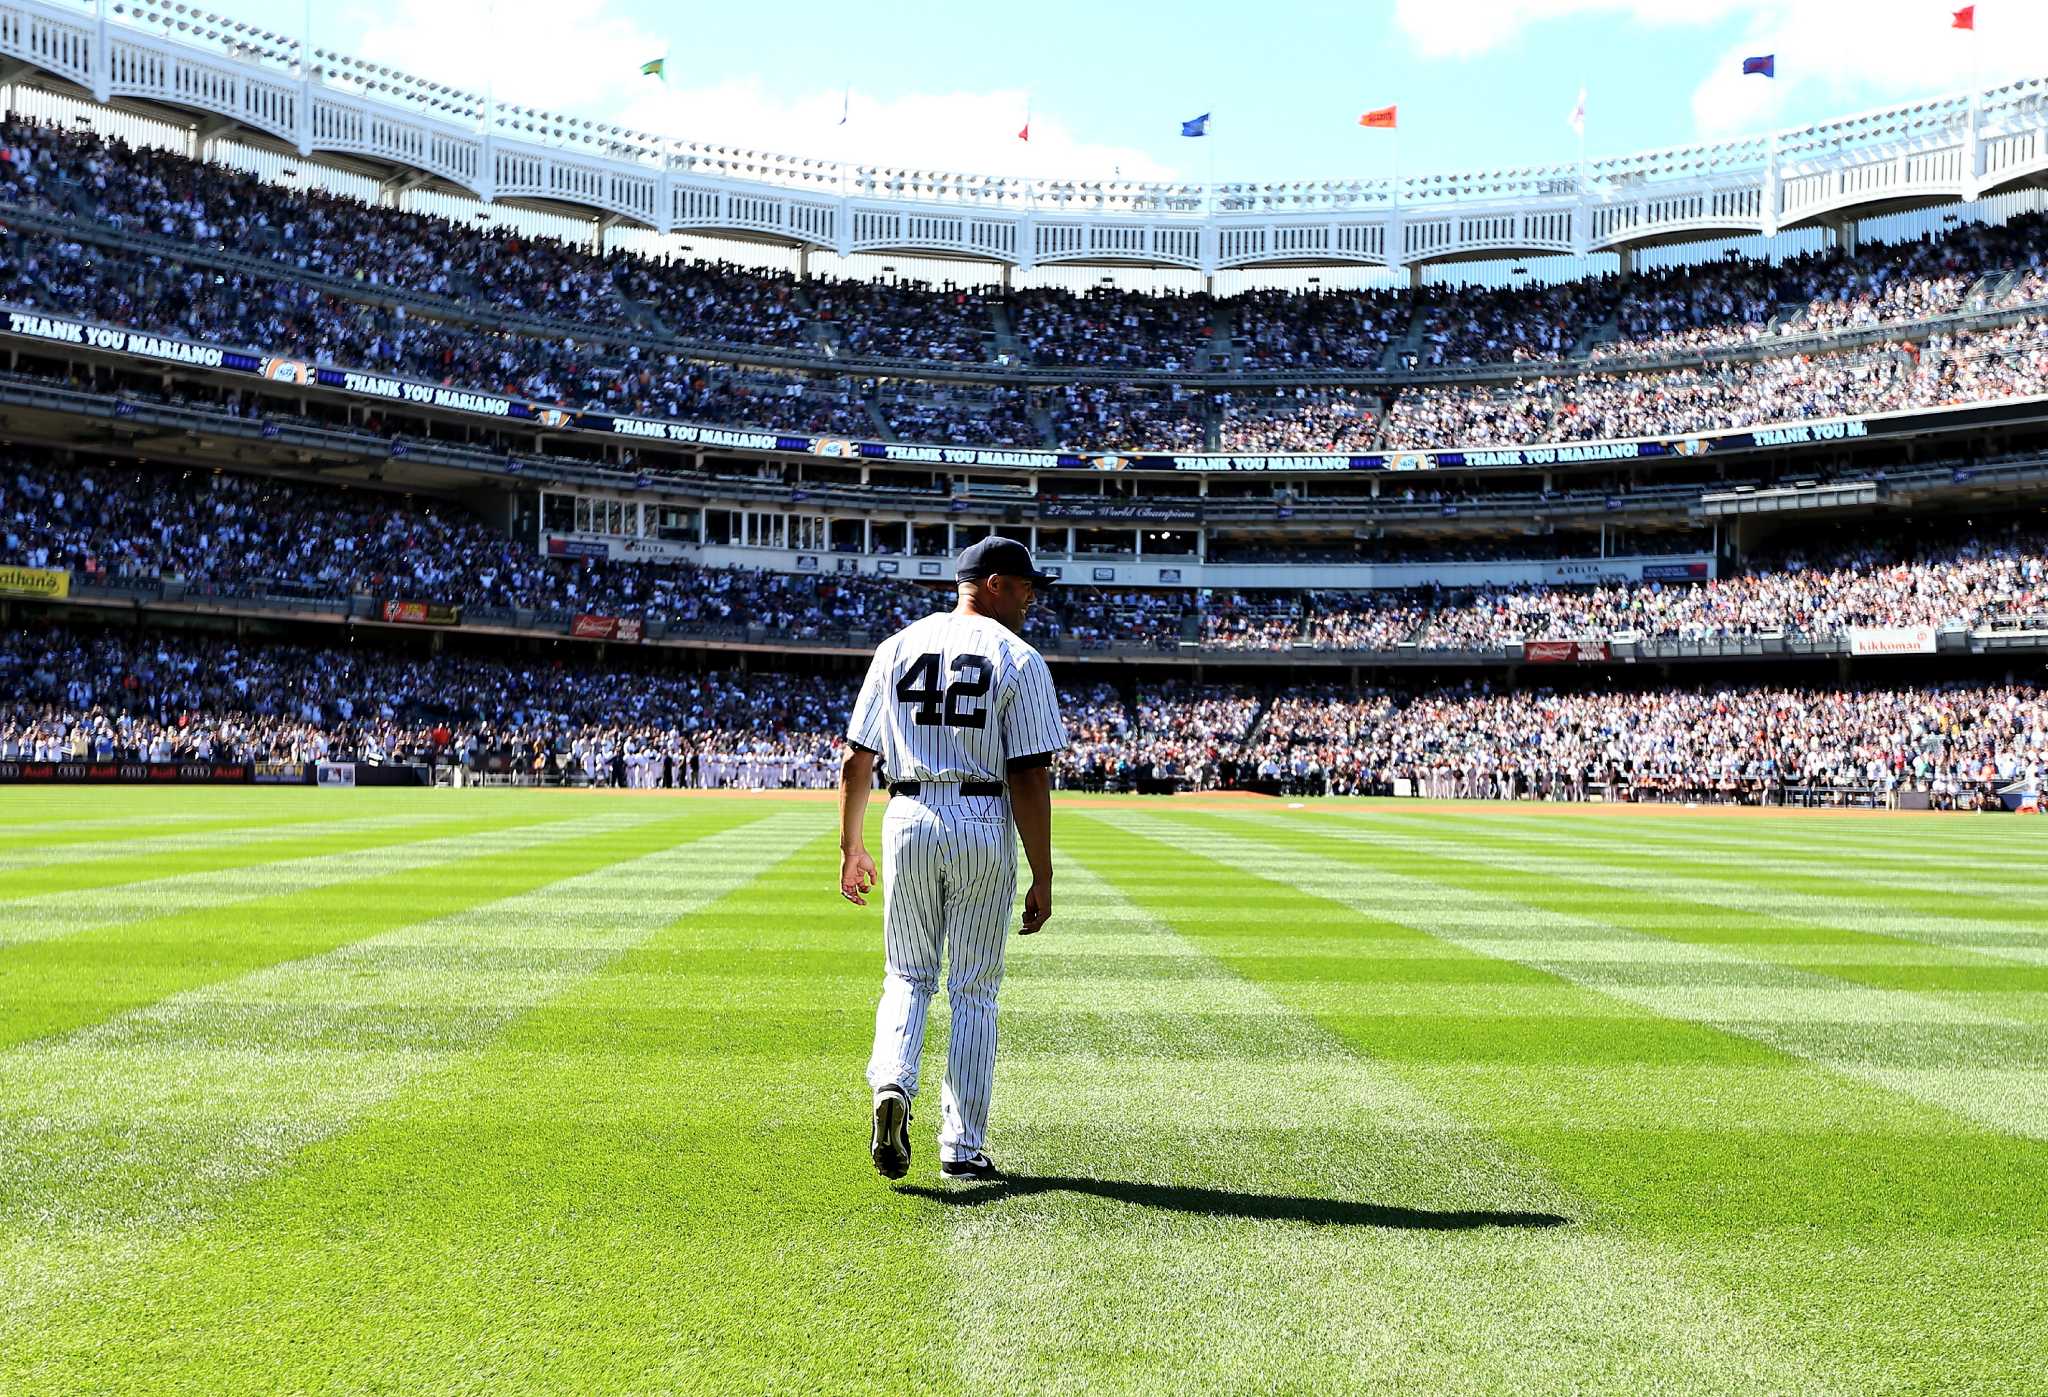 Yankees' Mariano Rivera is more than just his cutter 